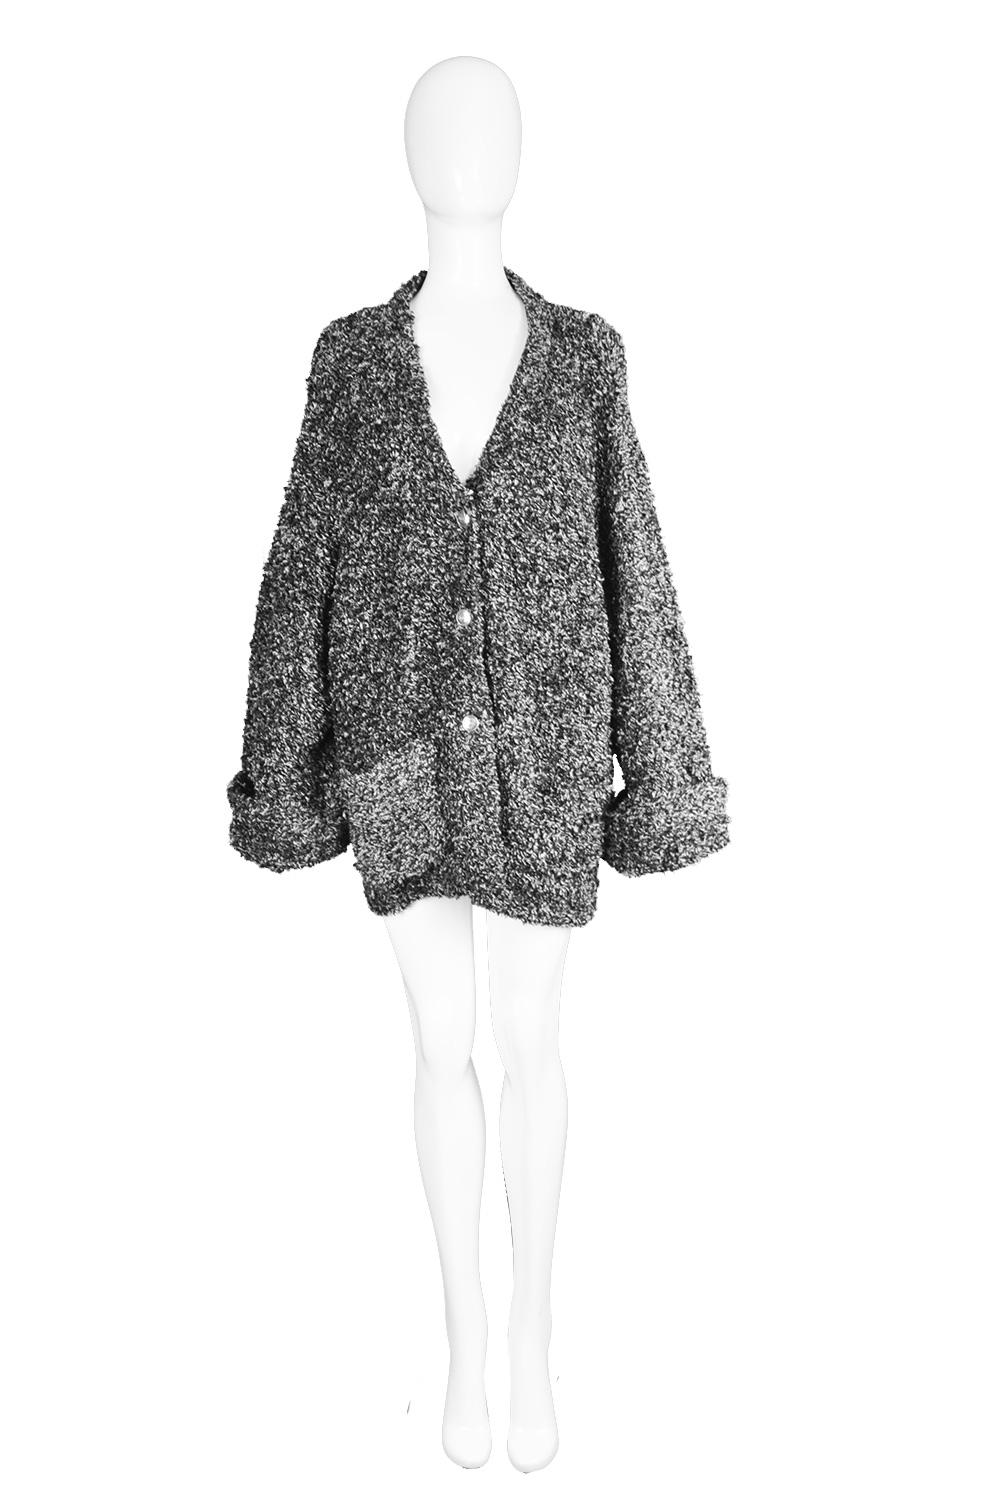 Fendi Vintage Black & White Fuzzy Slouchy Oversize Zucca Pattern Jacket, 1990s

Size: Unlabelled; best fits roughly a women's Medium to Large with an intentionally oversized fit. Please check measurements & description by clicking 'Continue Reading'